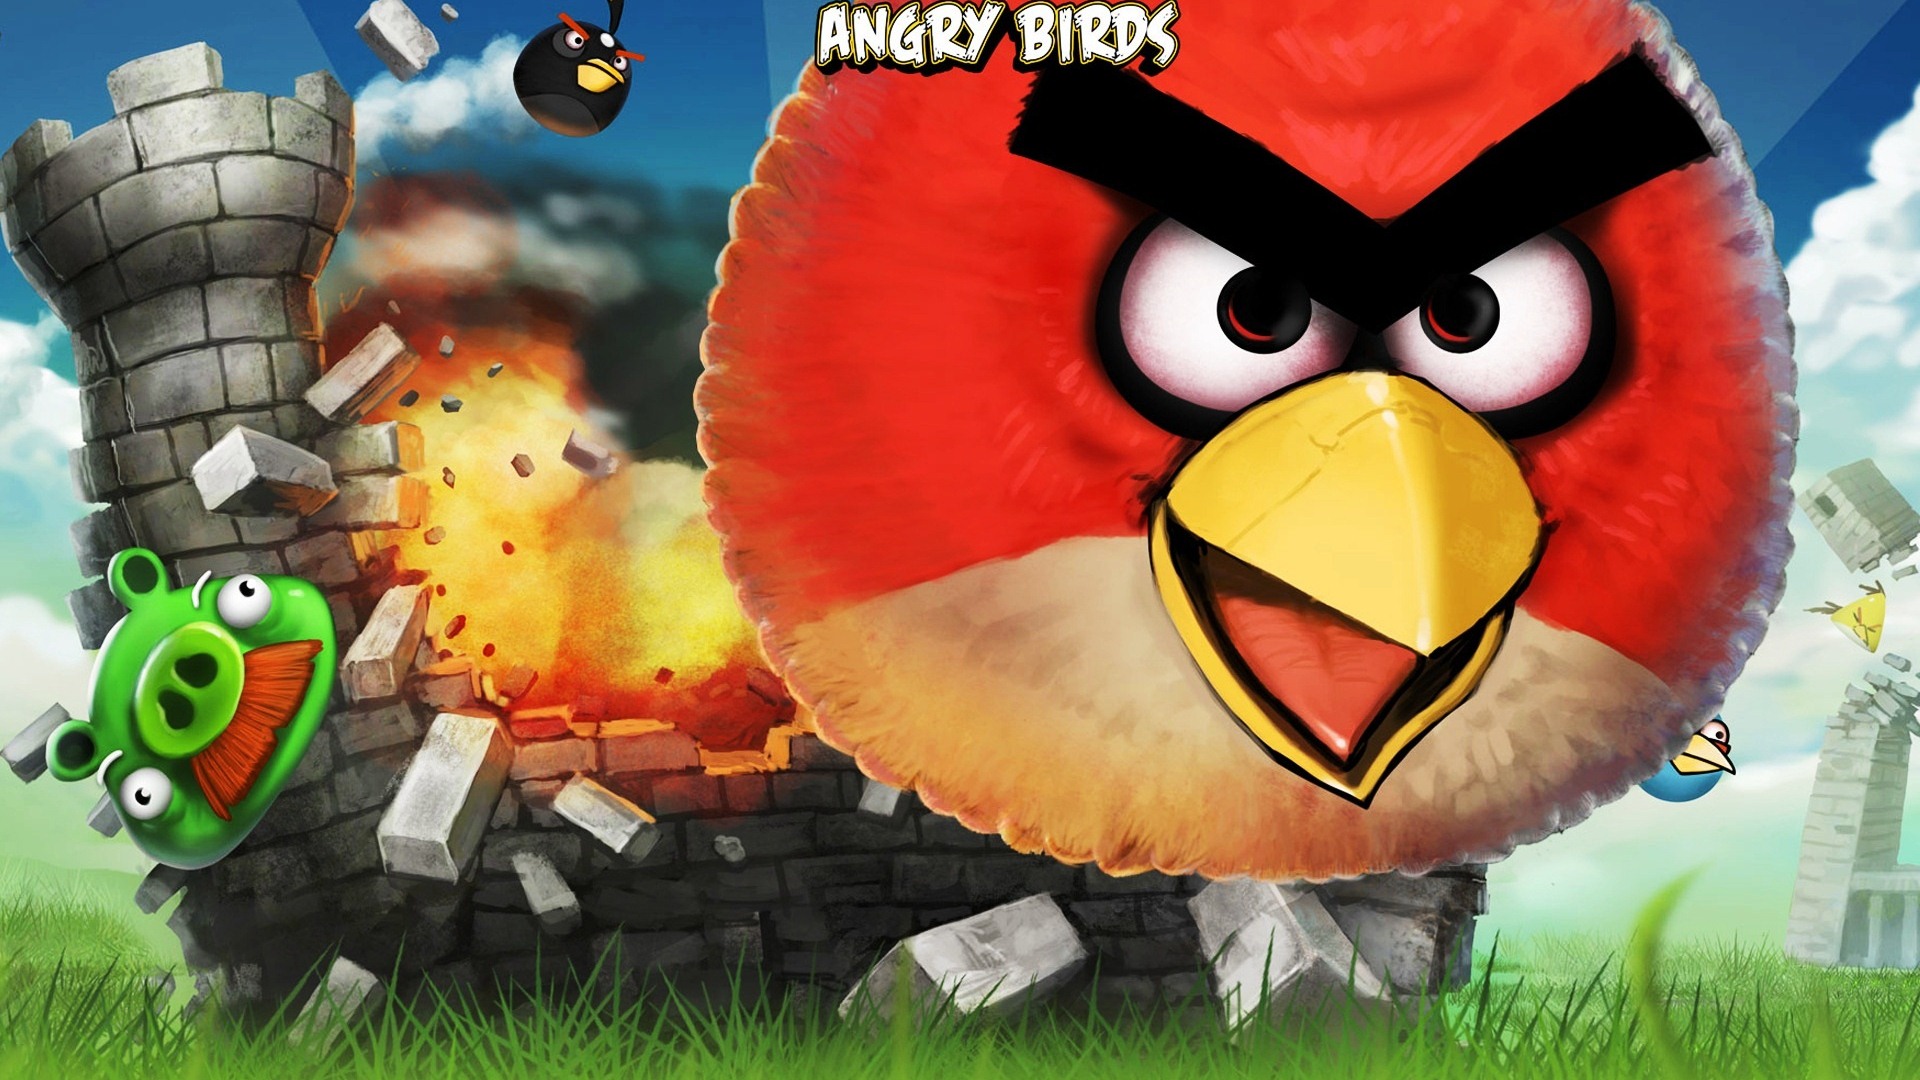 Angry Birds Game Wallpapers #7 - 1920x1080